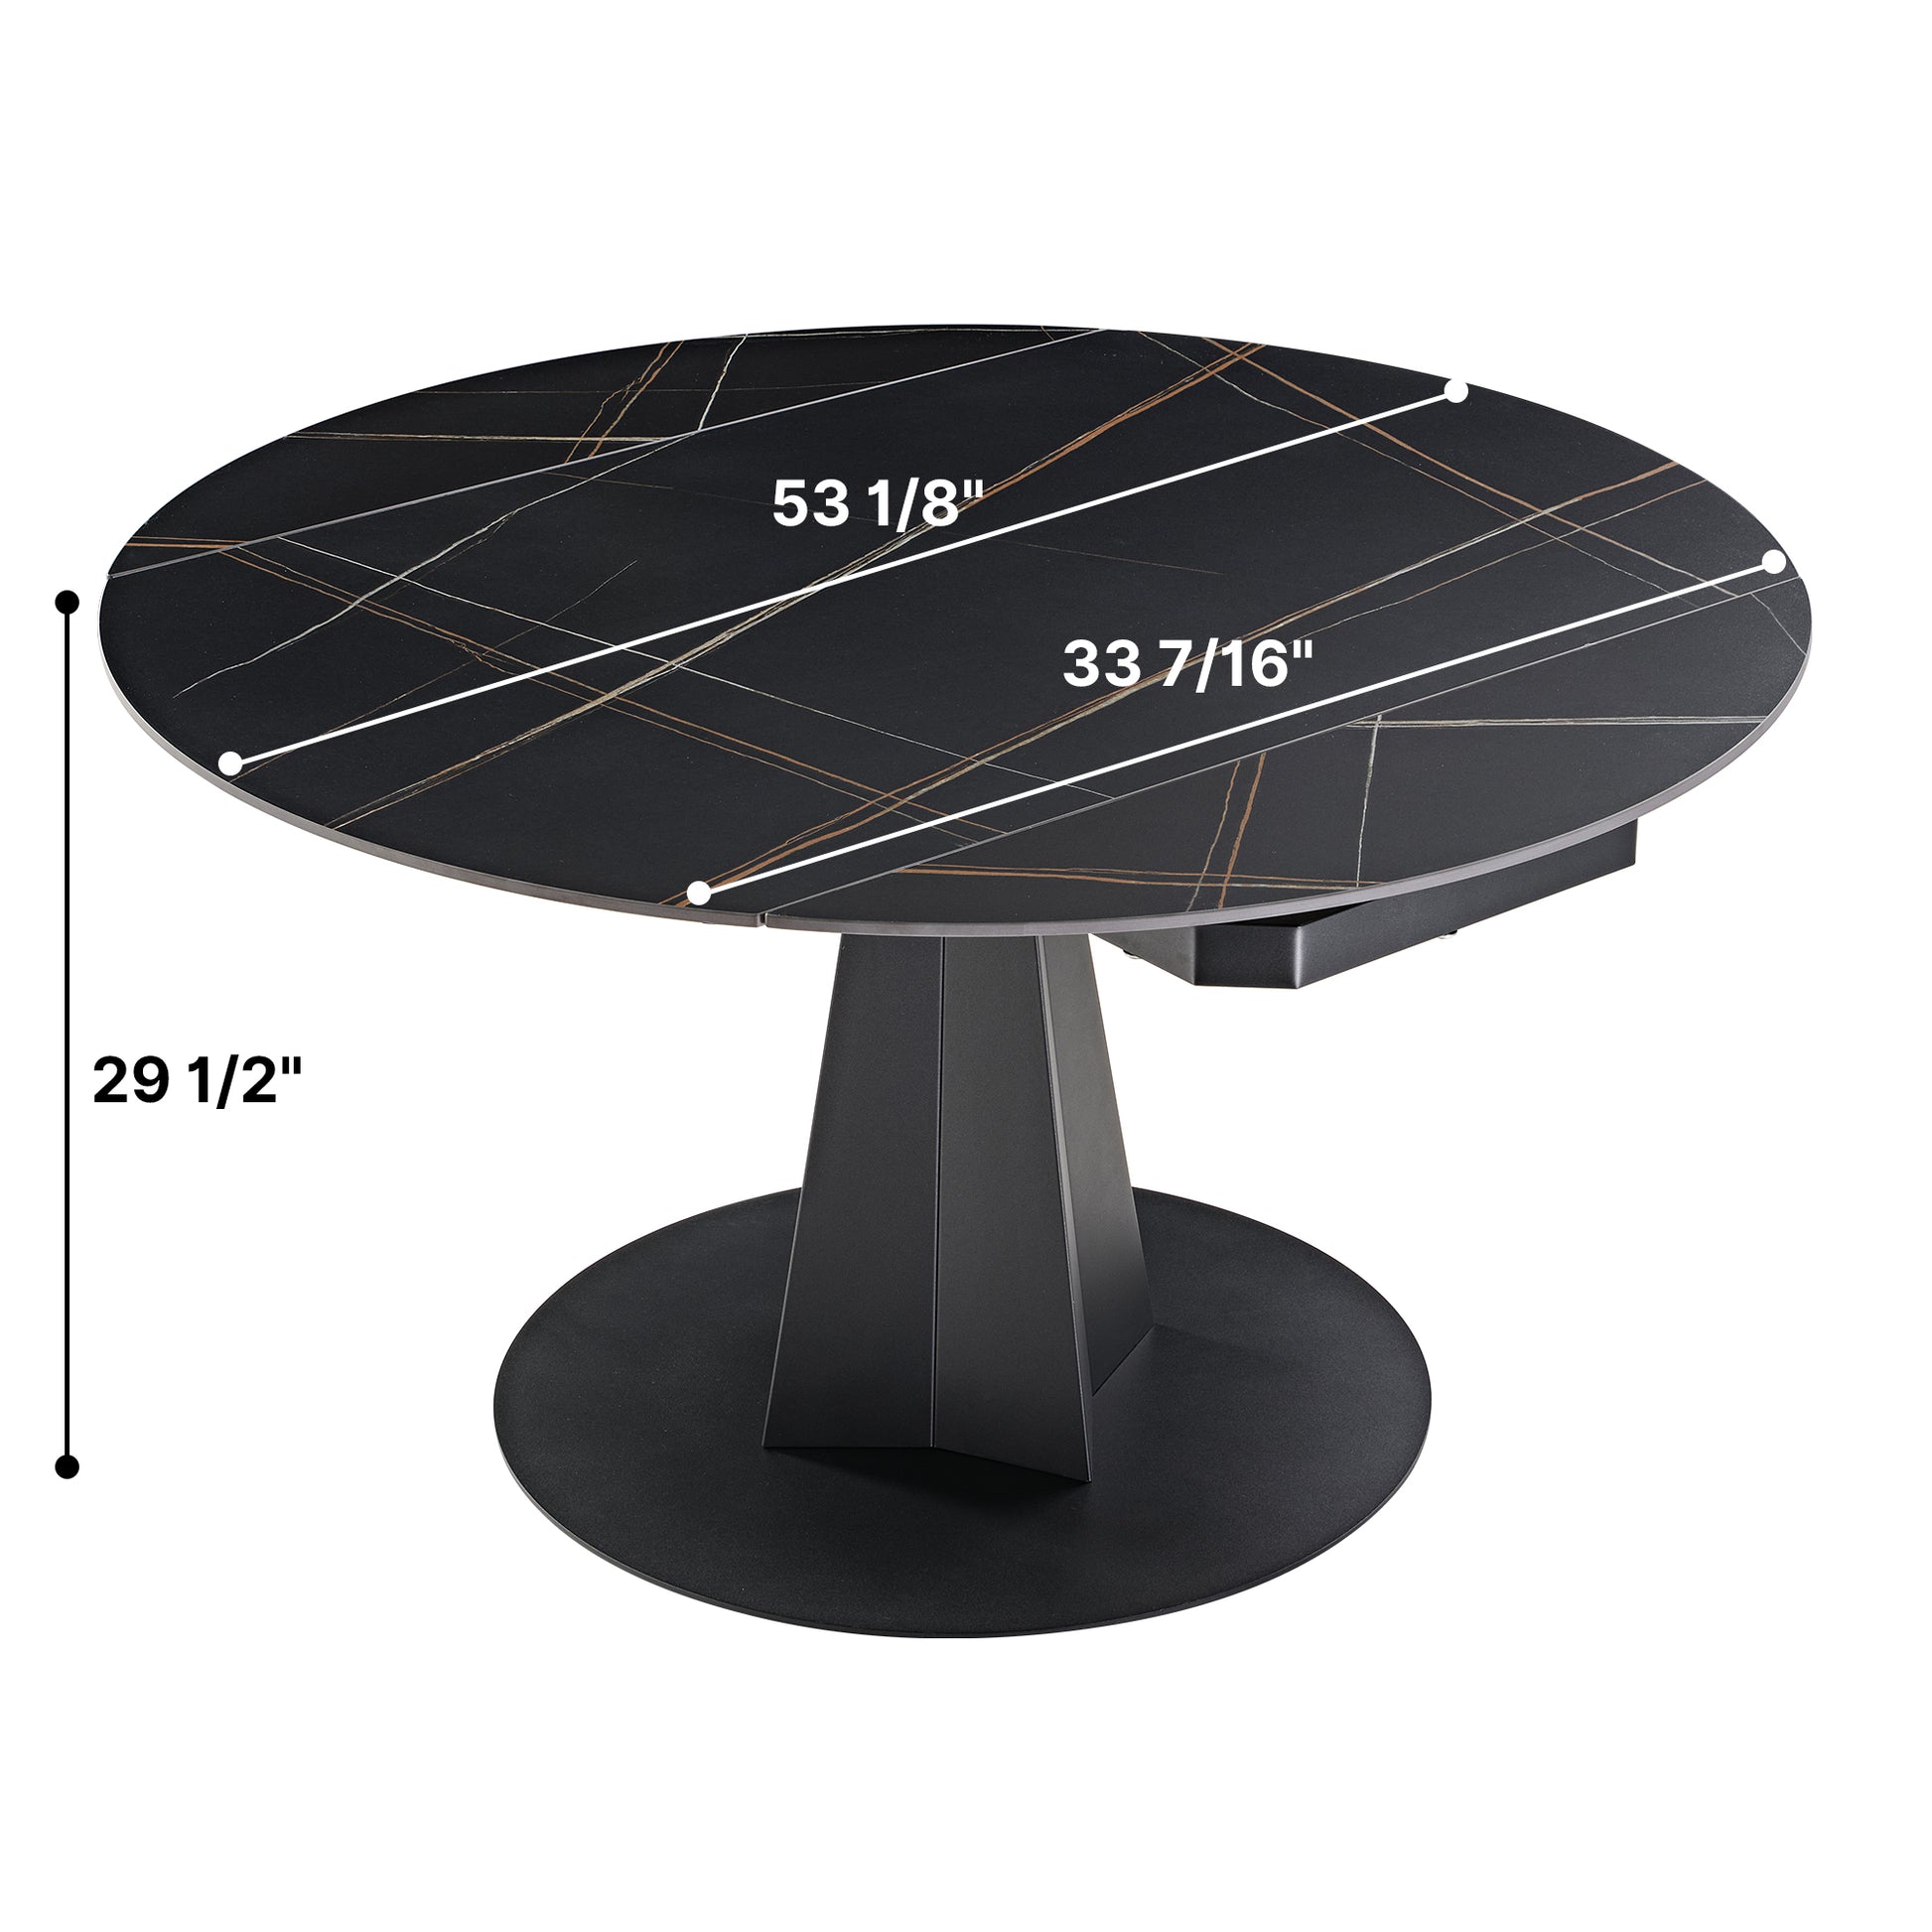 53 inch Round Extending Dining Table with Black Base, Product Dimensions